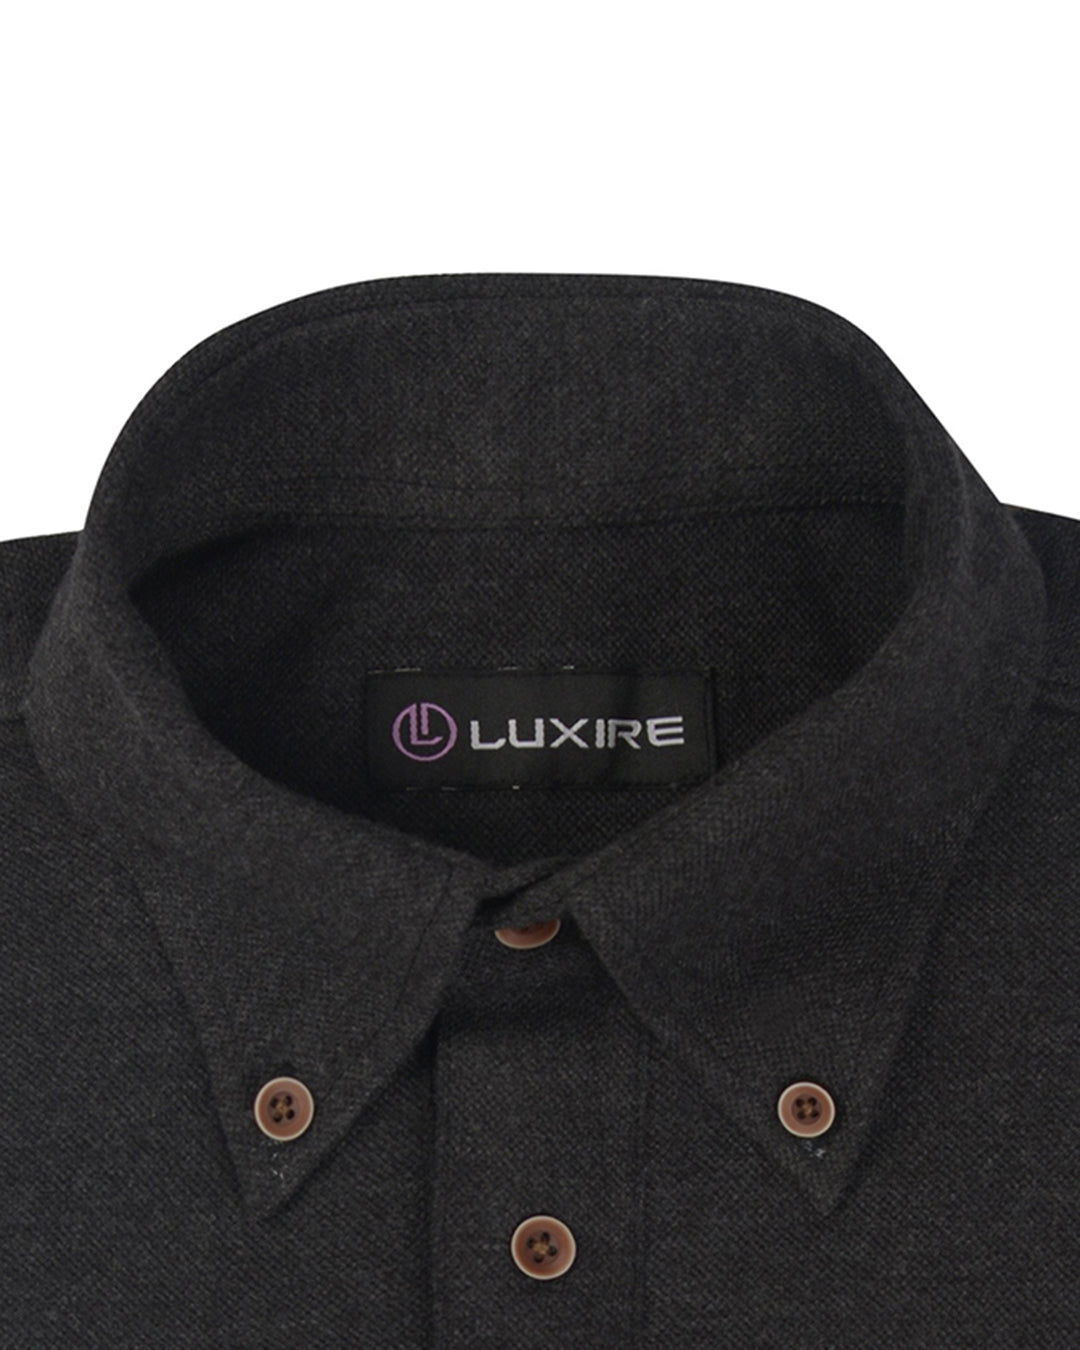 Collar of the custom oxford polo shirt for men by Luxire in anchor grey